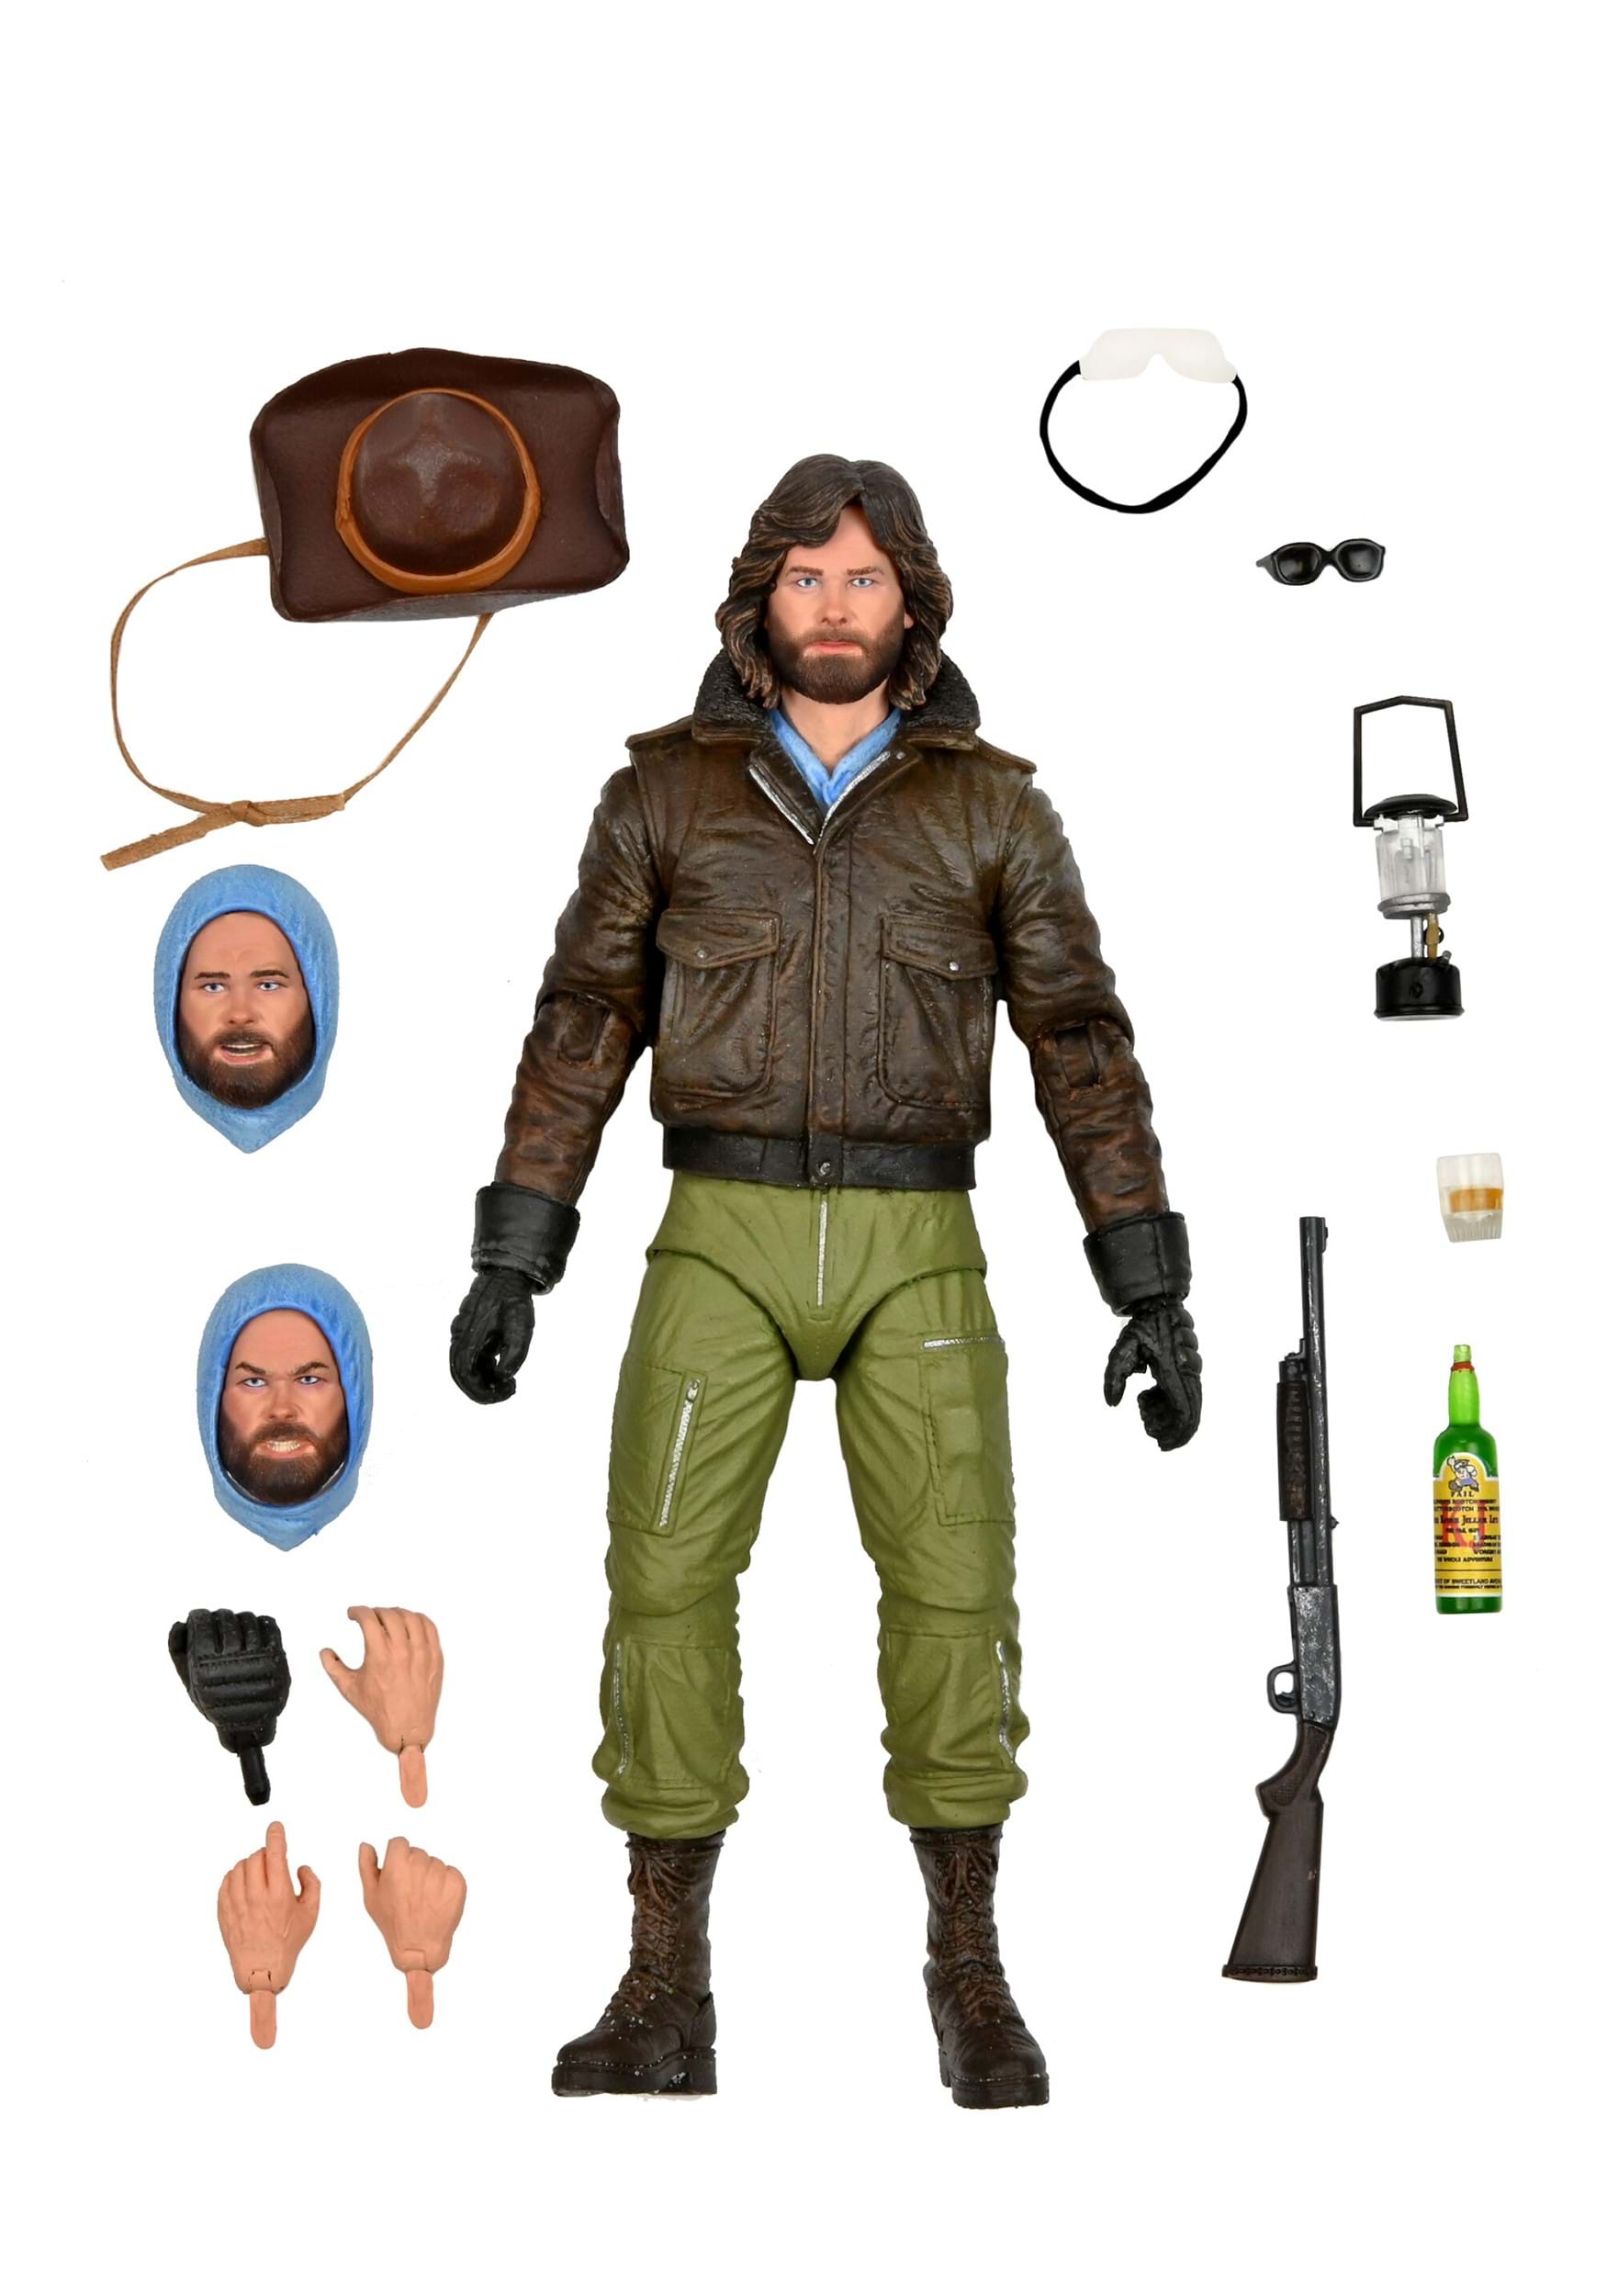 Ultimate MacReady 7" Scale Action Figure from The Thing